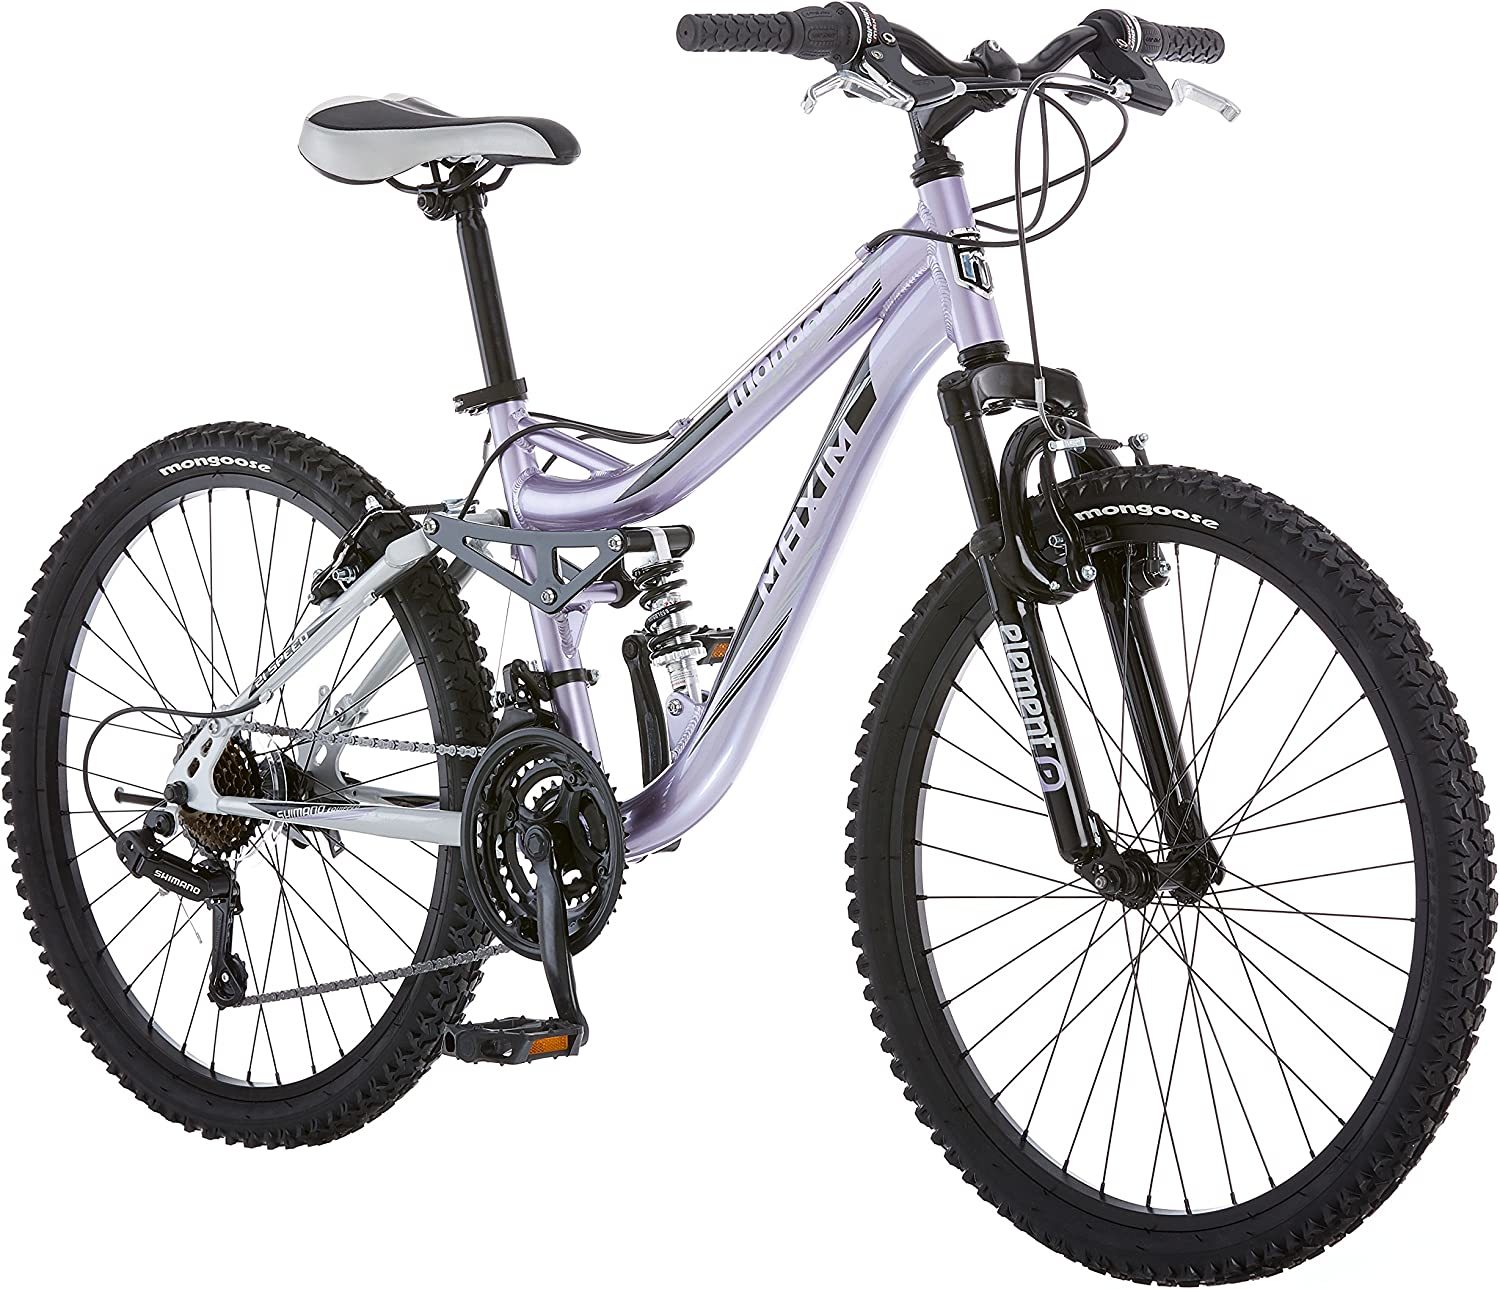 24-Inch Wheels, An Aluminum Frame, A 21-Speed Drivetrain, And Lavender Make Up - $413.98